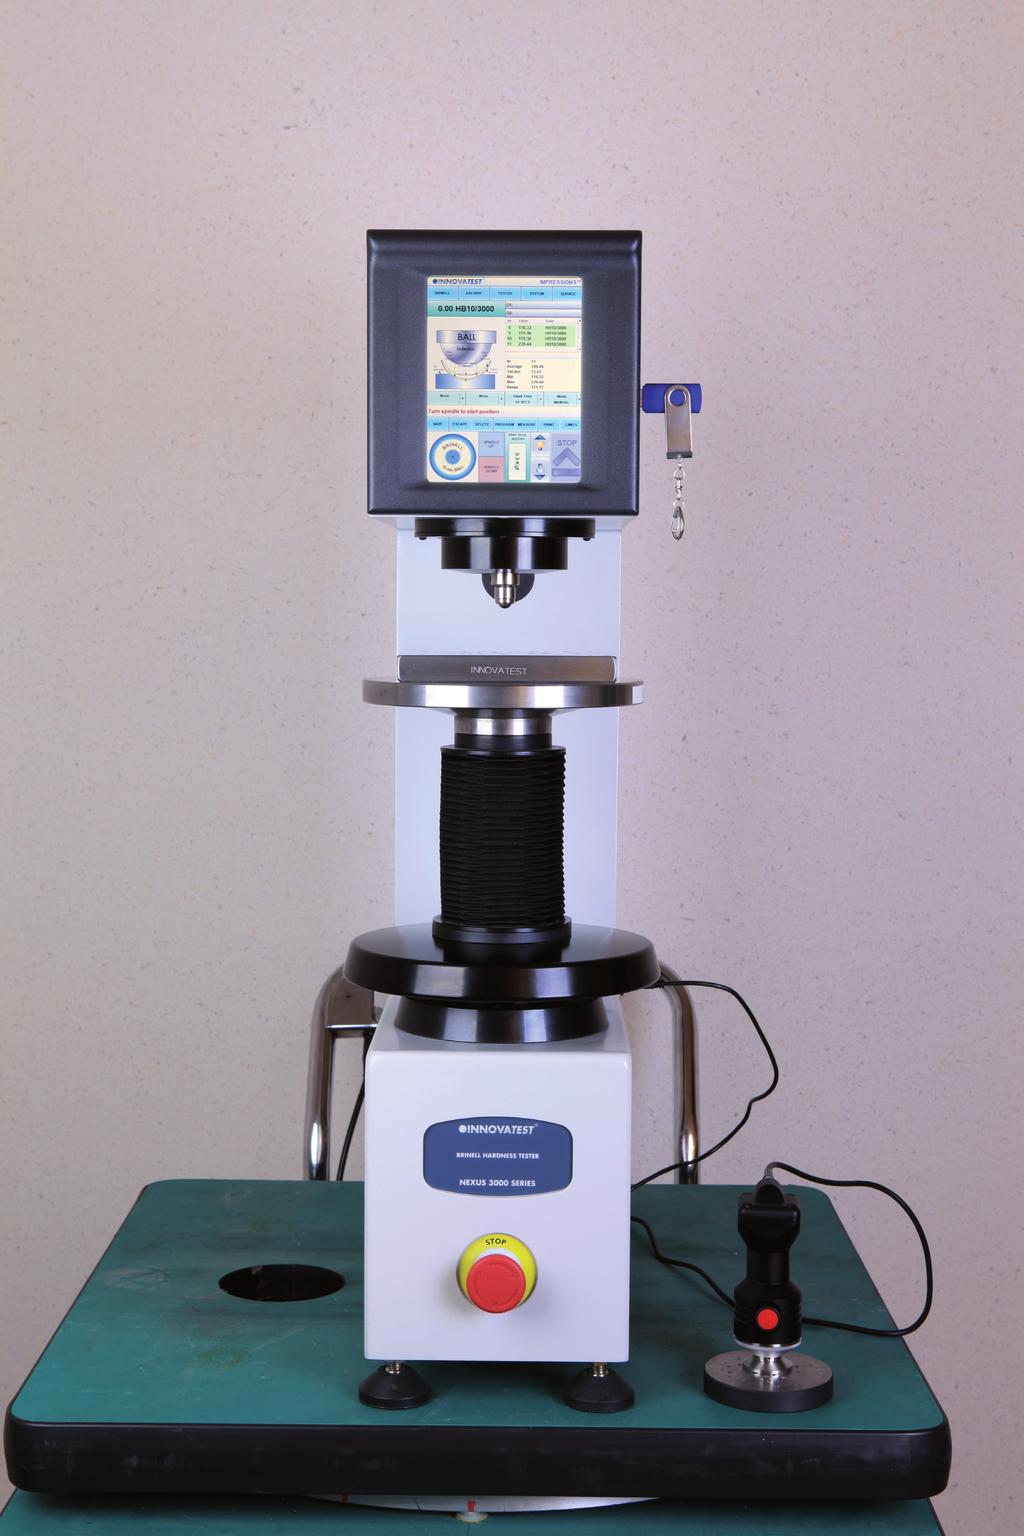 Features Top quality compact Brinell hardness tester with video measuring system. Load cell, closed loop, force application system. Test forces starting from 62.5kgf/612N up to 3000kgf/29kN.